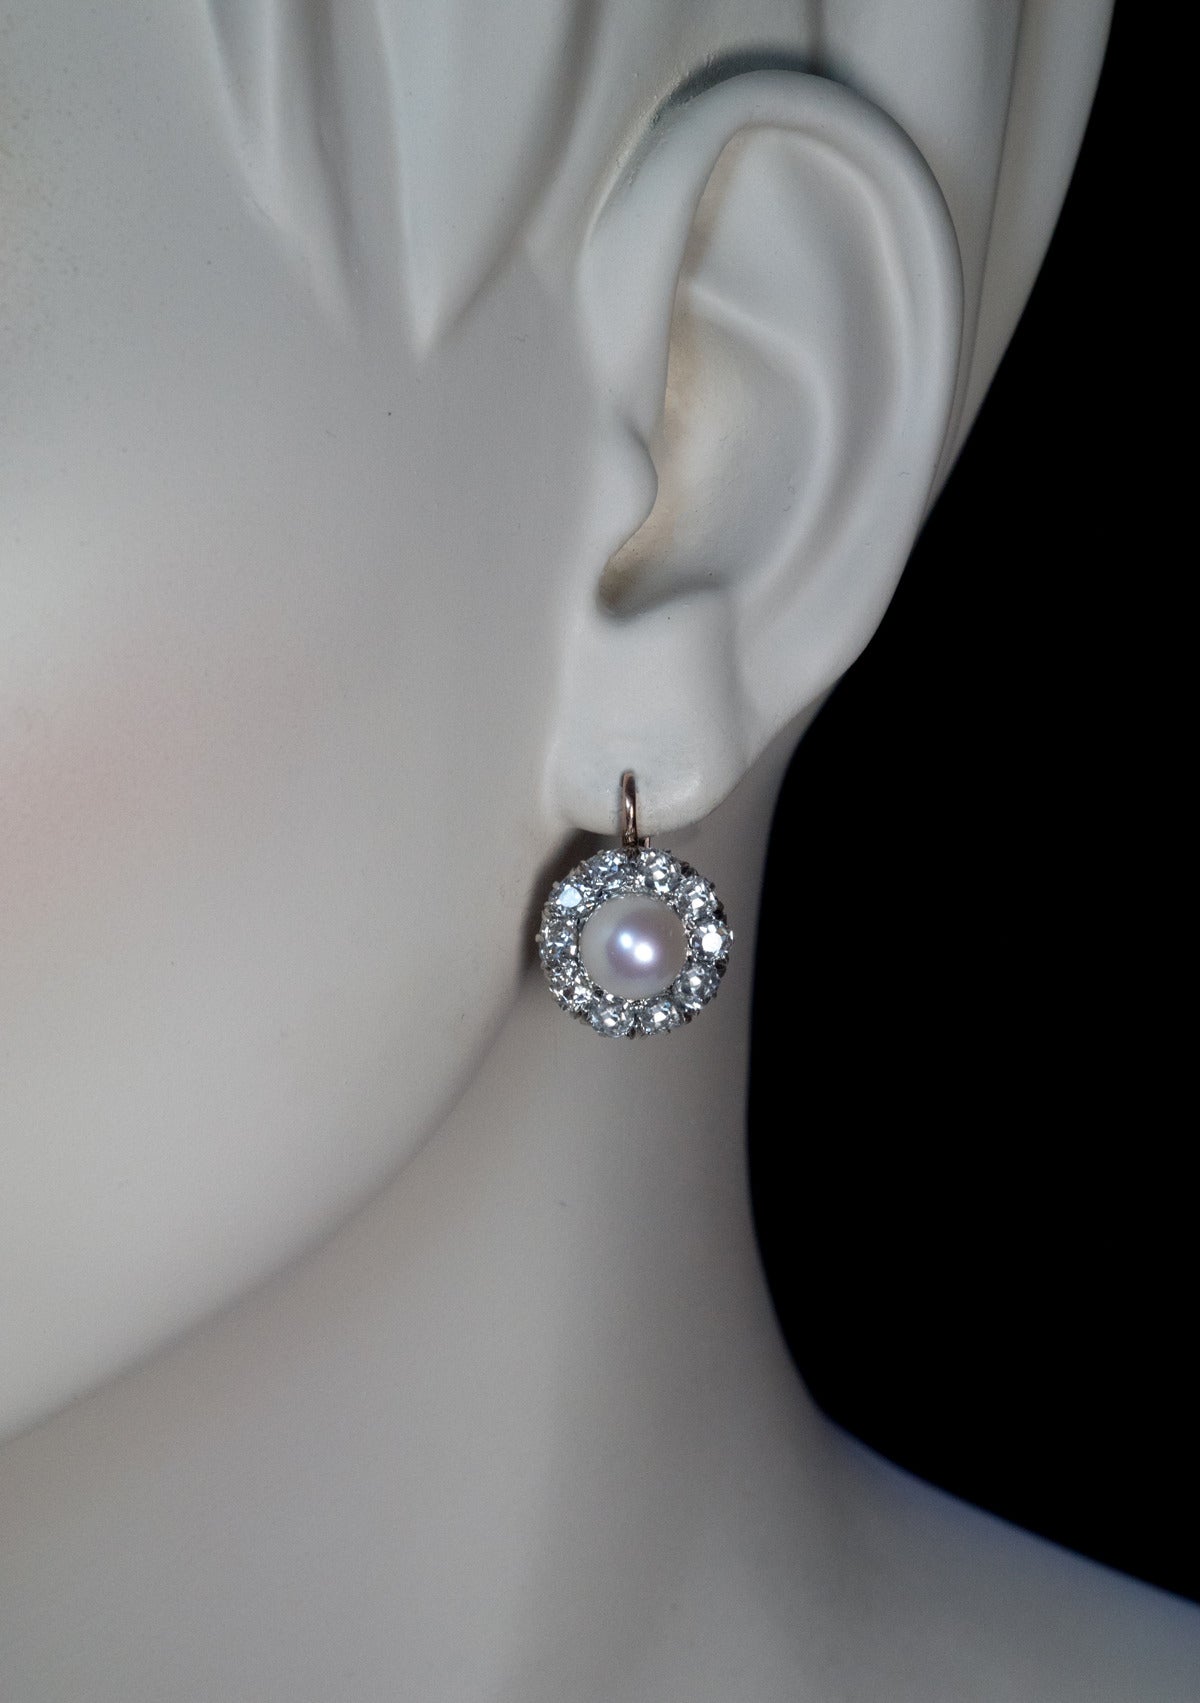 circa 1910

silver topped 14K rose gold earrings centered with 7.9 mm cultured pearls surrounded by antique cushion cut diamonds (H-I color, VS2-SI1 clarity)

estimated total diamond weight 3.80 ct

diameter 15 mm (5/8 in.)

marked with